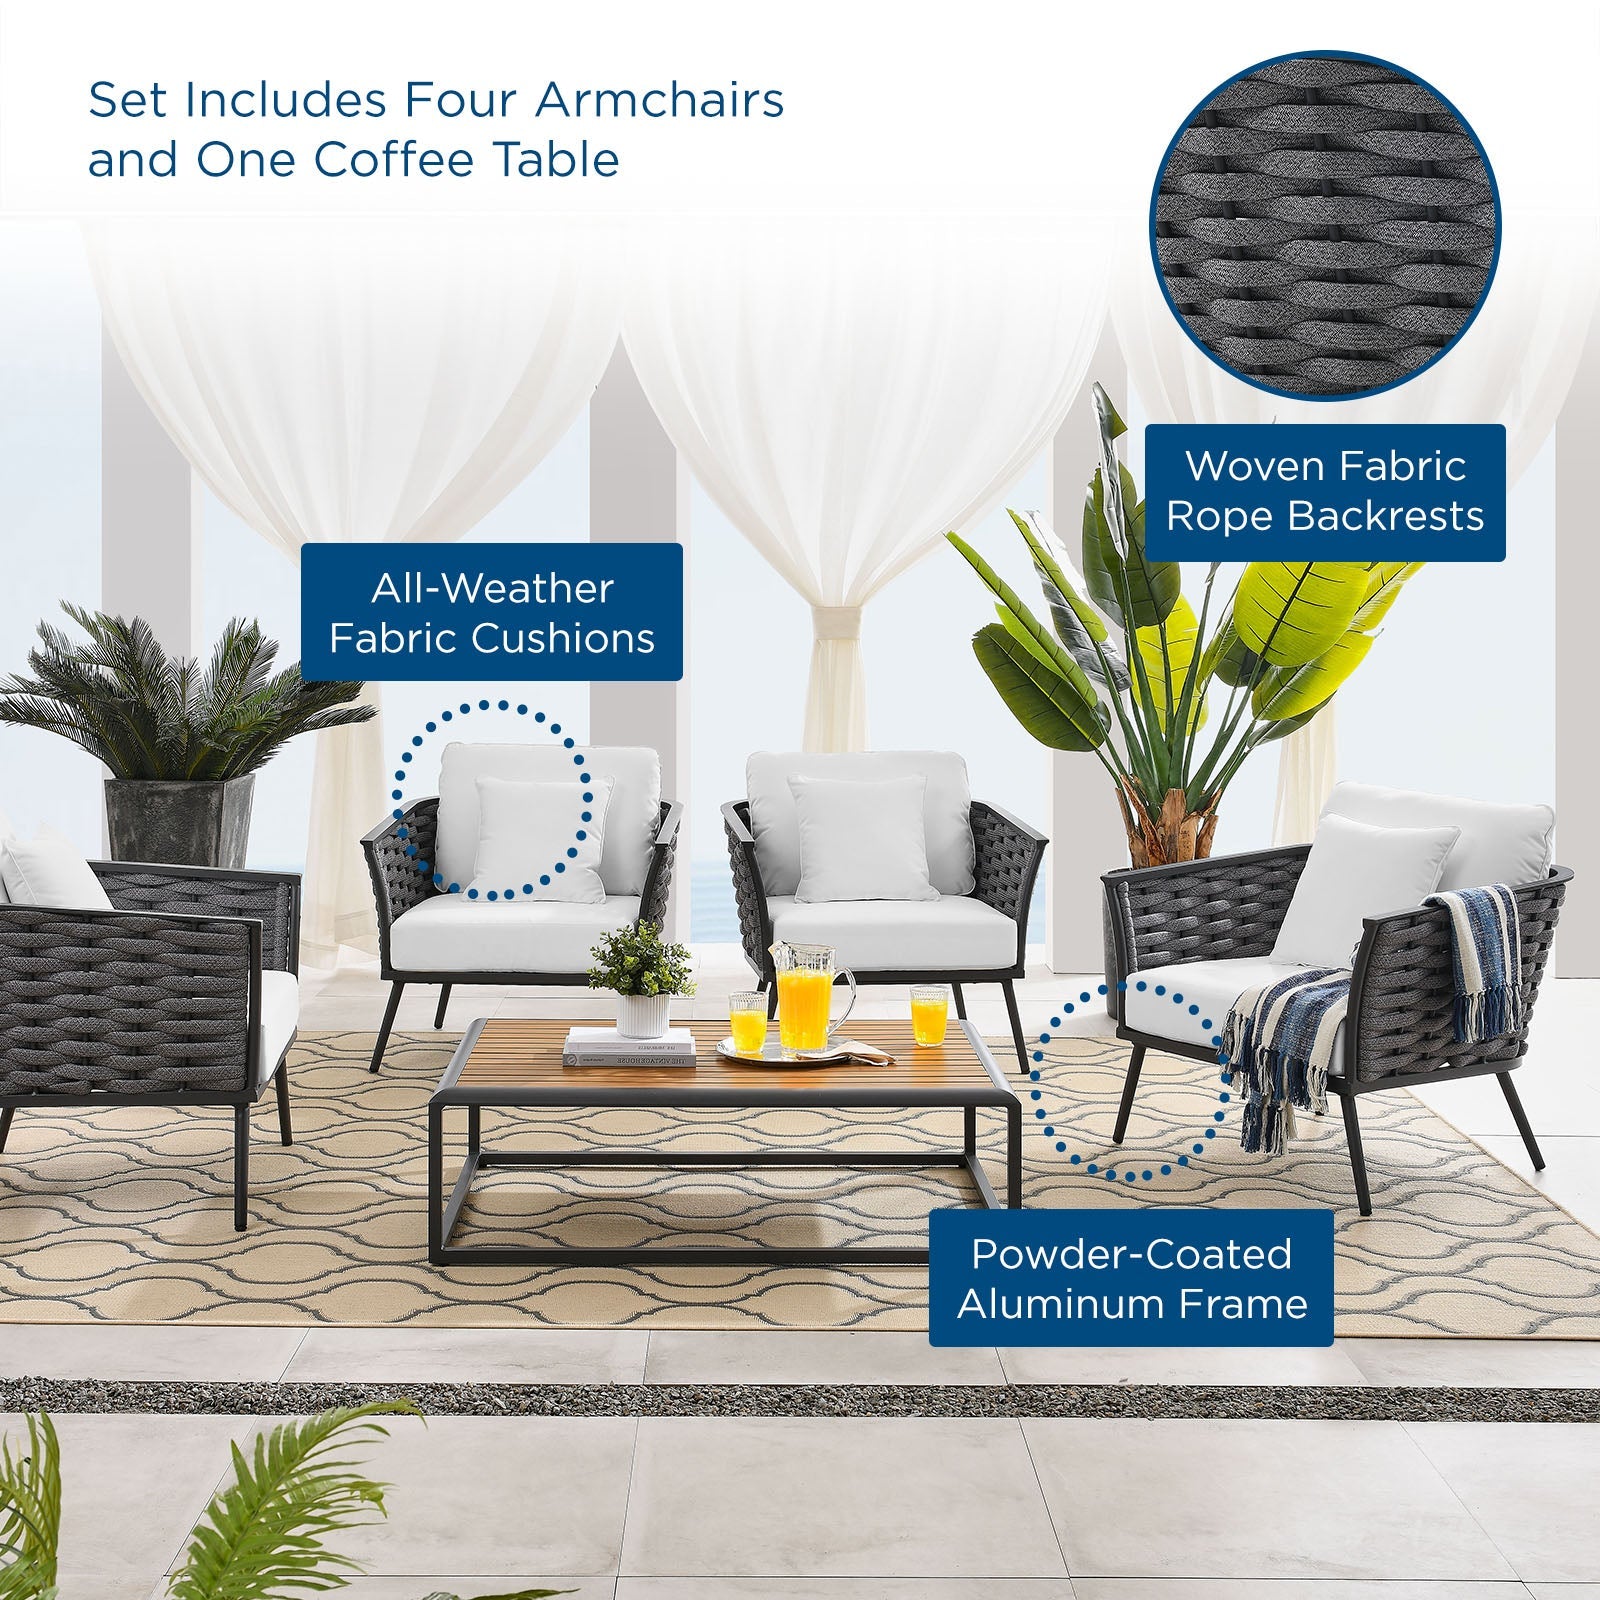 Stance 5 Piece Outdoor Patio Aluminum Sectional Sofa Set - East Shore Modern Home Furnishings